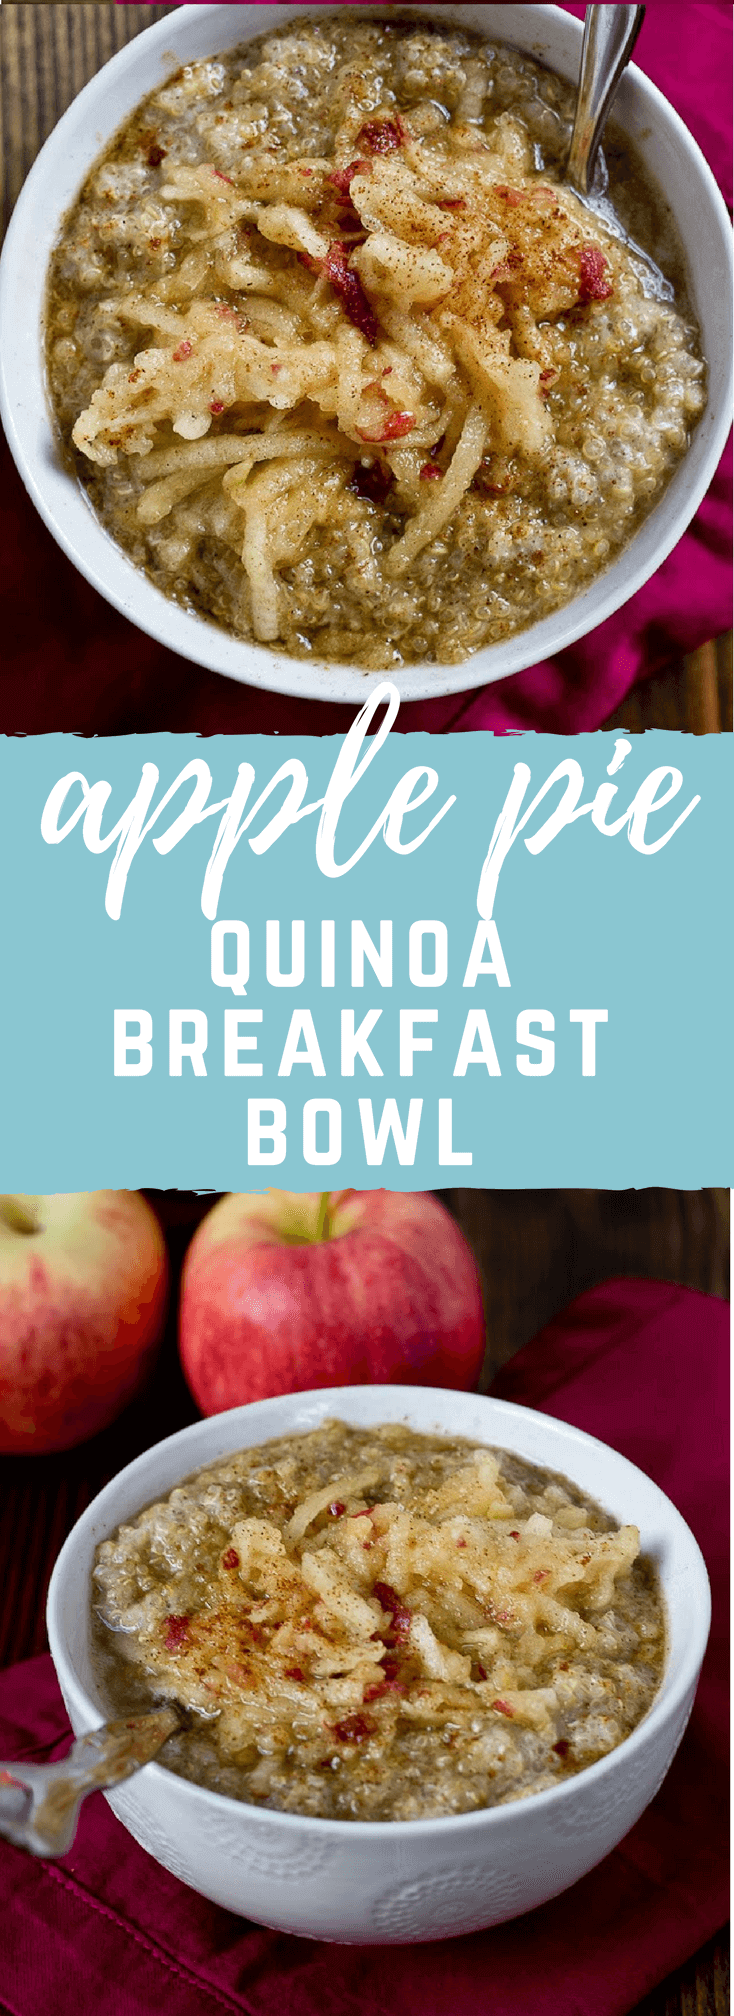 This Apple Pie Quinoa Breakfast Bowl will make your fall weather loving life. It's spicy and topped with shredded apples, FTW.